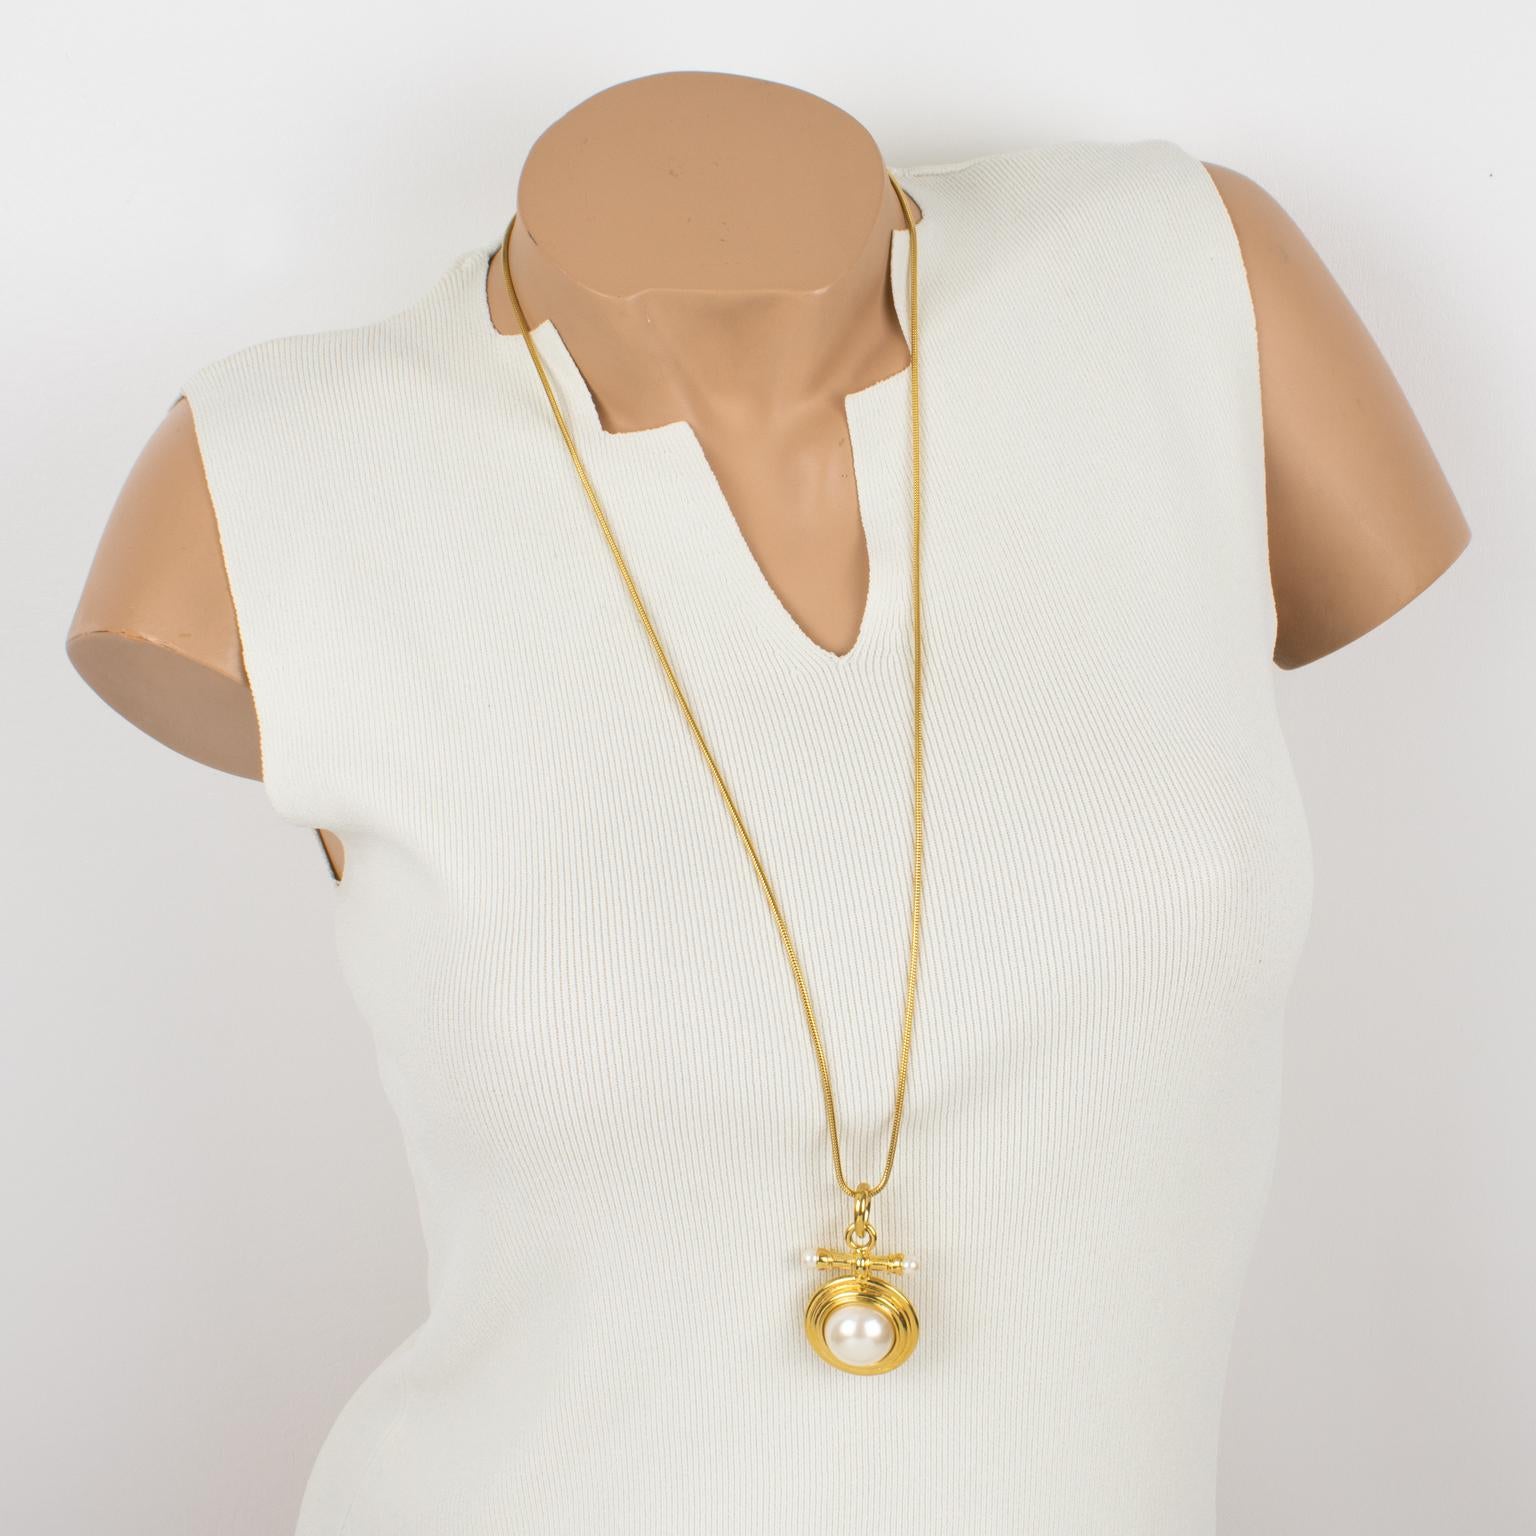 This elegant Givenchy Paris pendant necklace features a dimensional geometric design with shiny gilded metal, complemented by pearl-like cabochons. The long gilt metal serpentine chain has a lobster-closing clasp. The pendant is marked underside